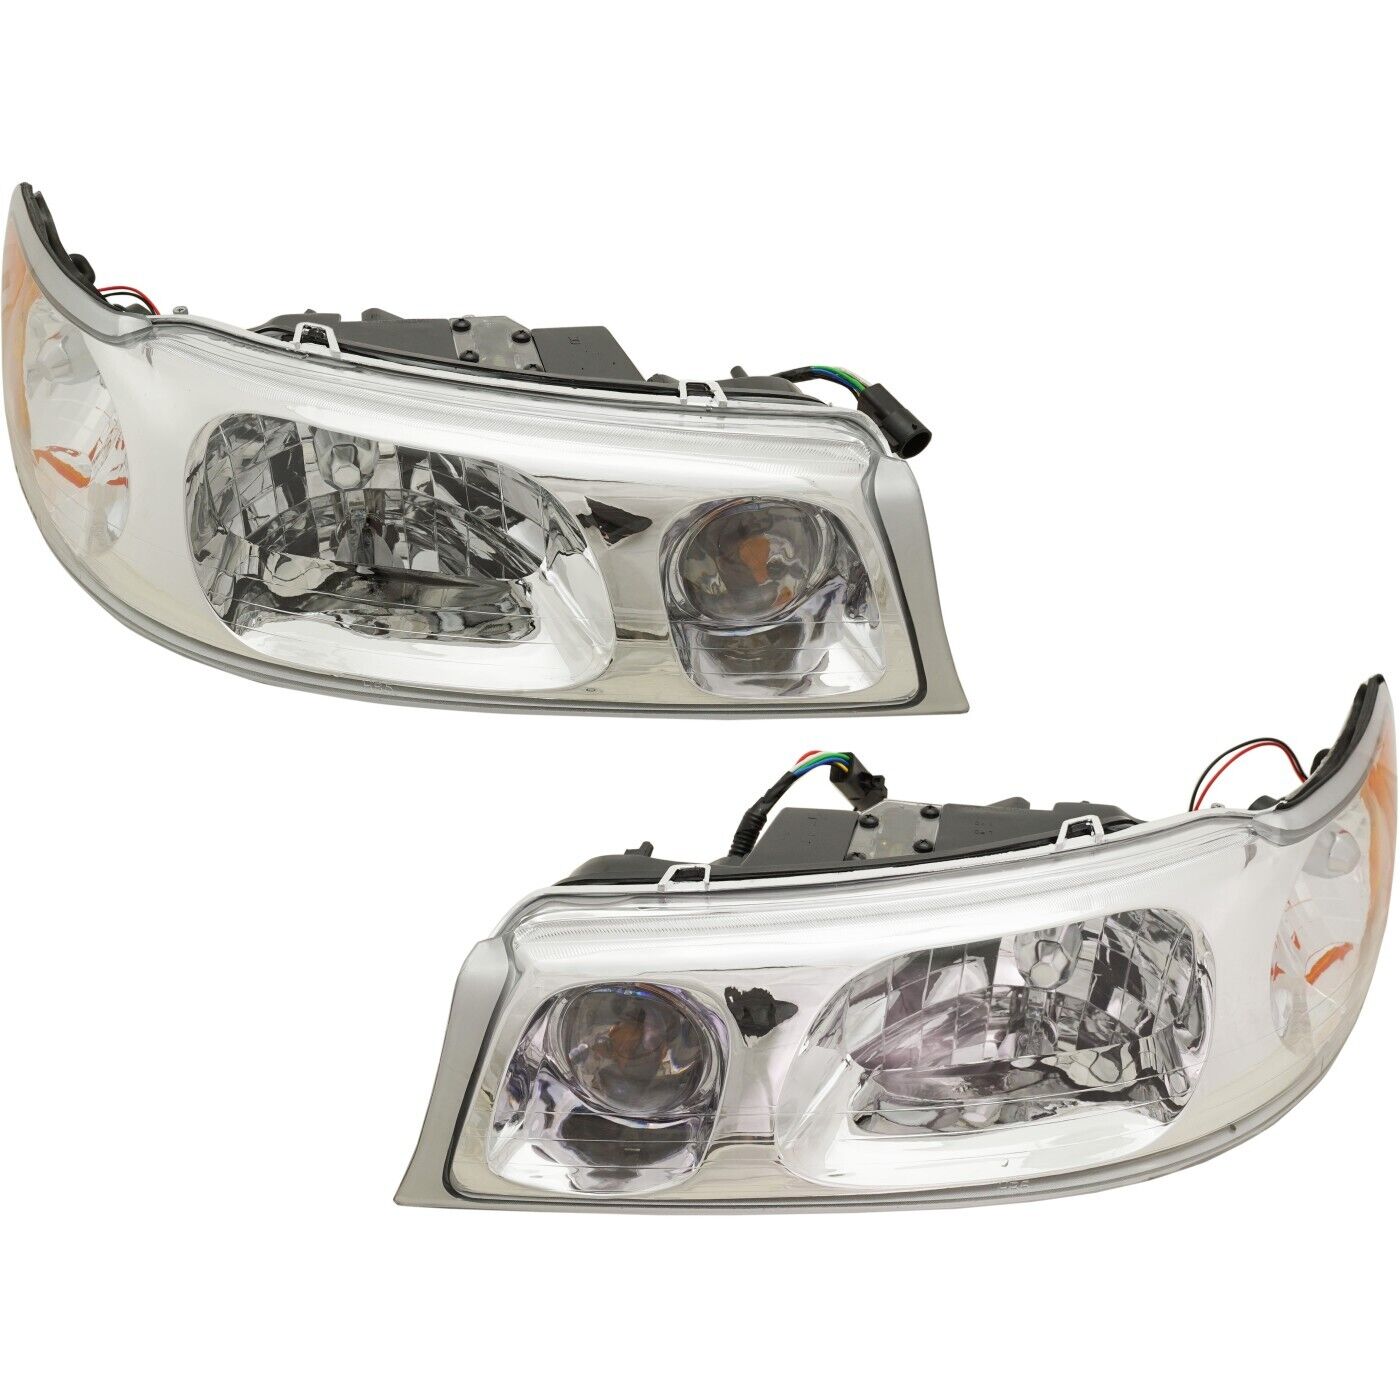 Headlight Set For 1998-2002 Lincoln Town Car Left and Right Headlamp With Bulb